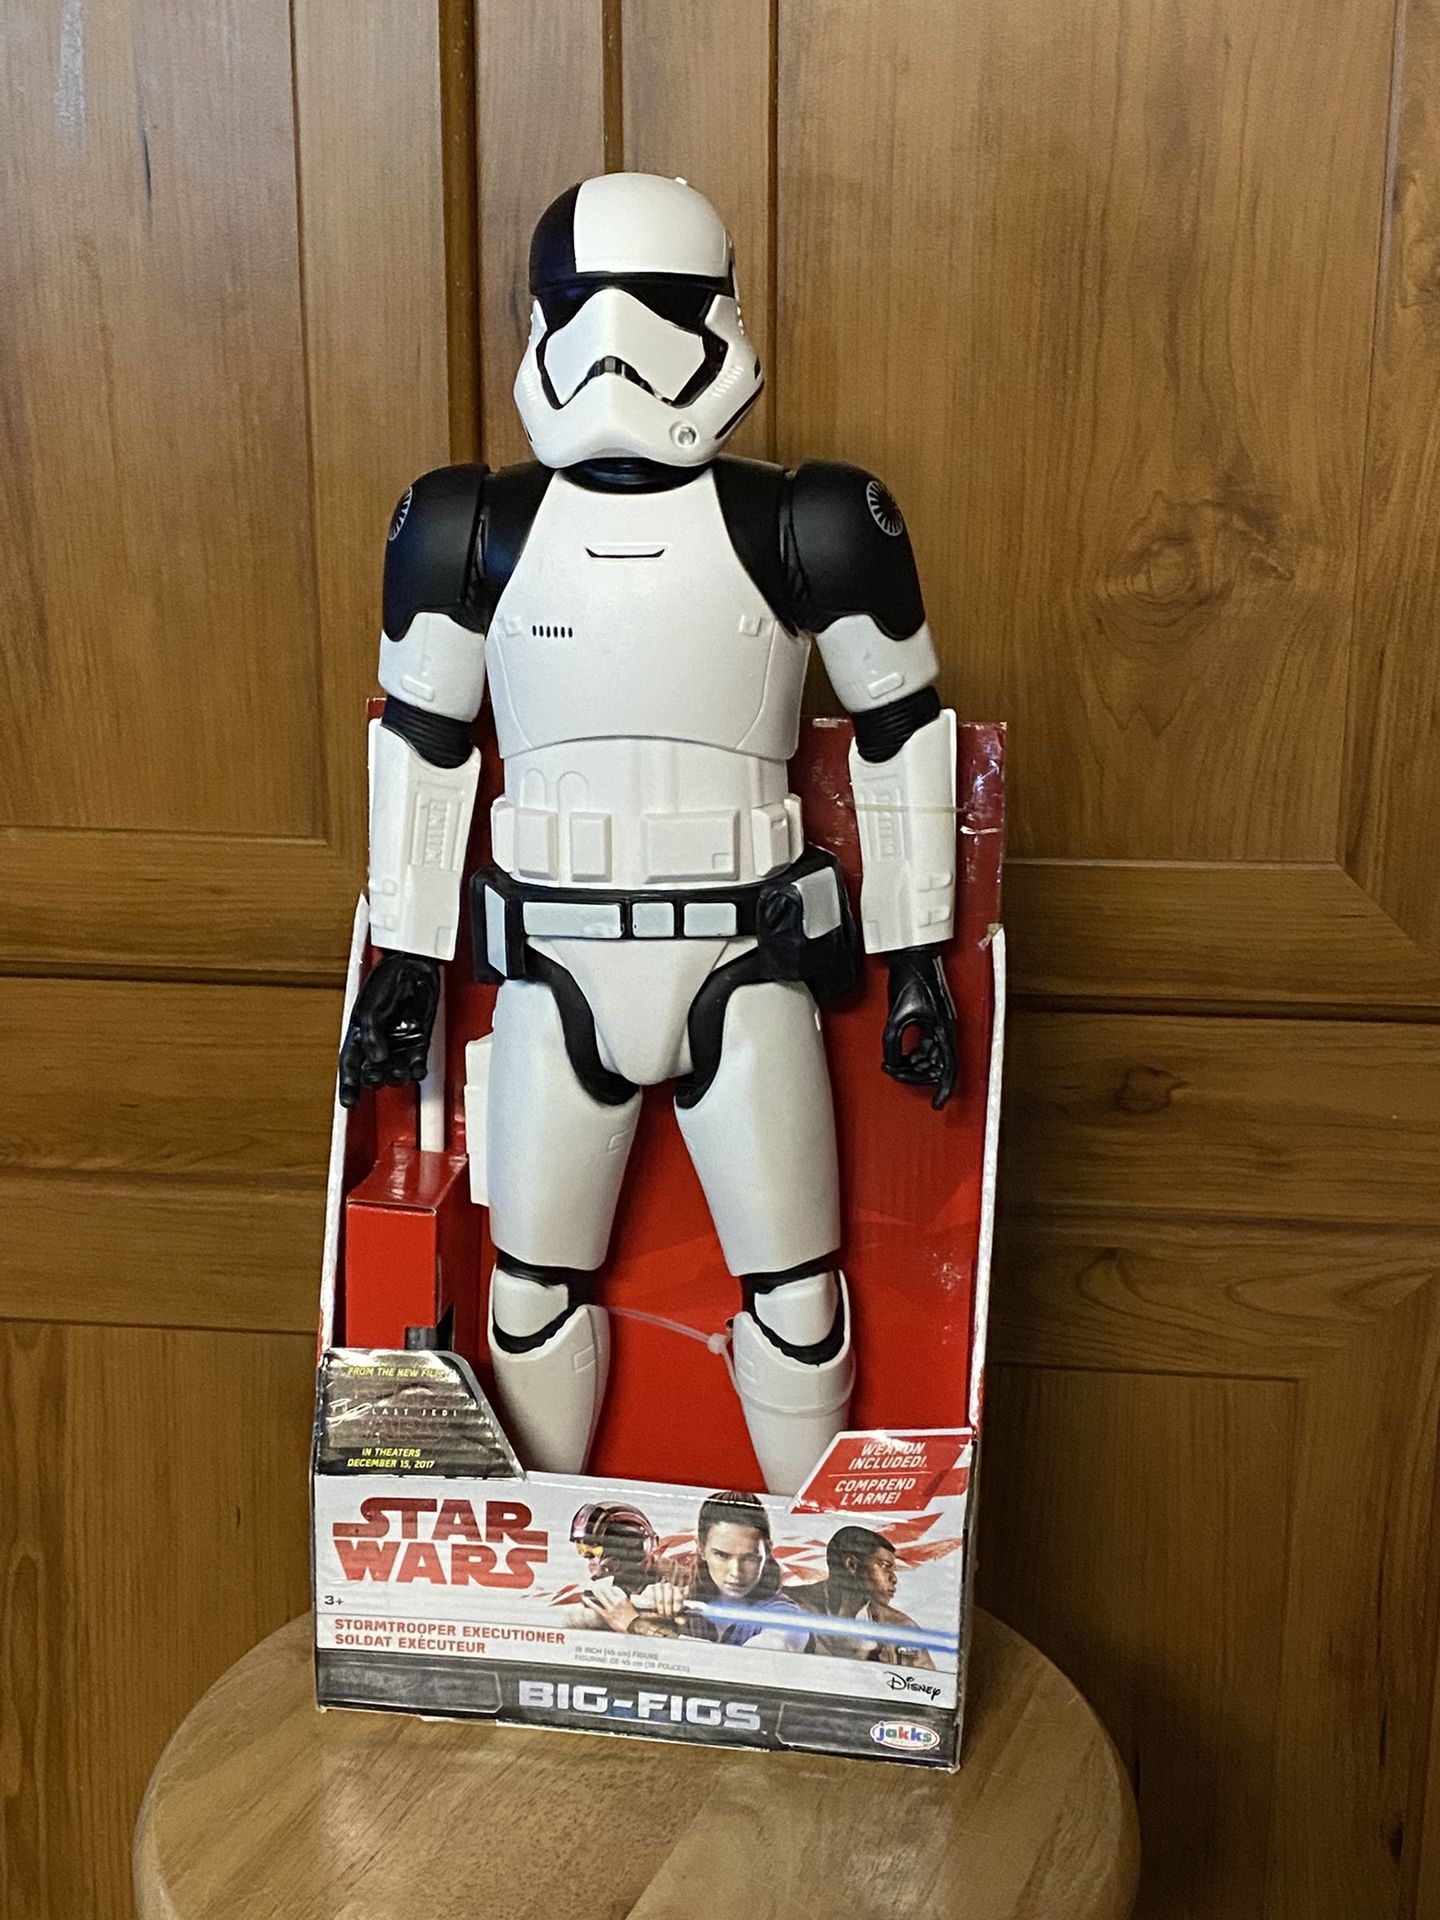 Star Wars Stormtroopers Executioner